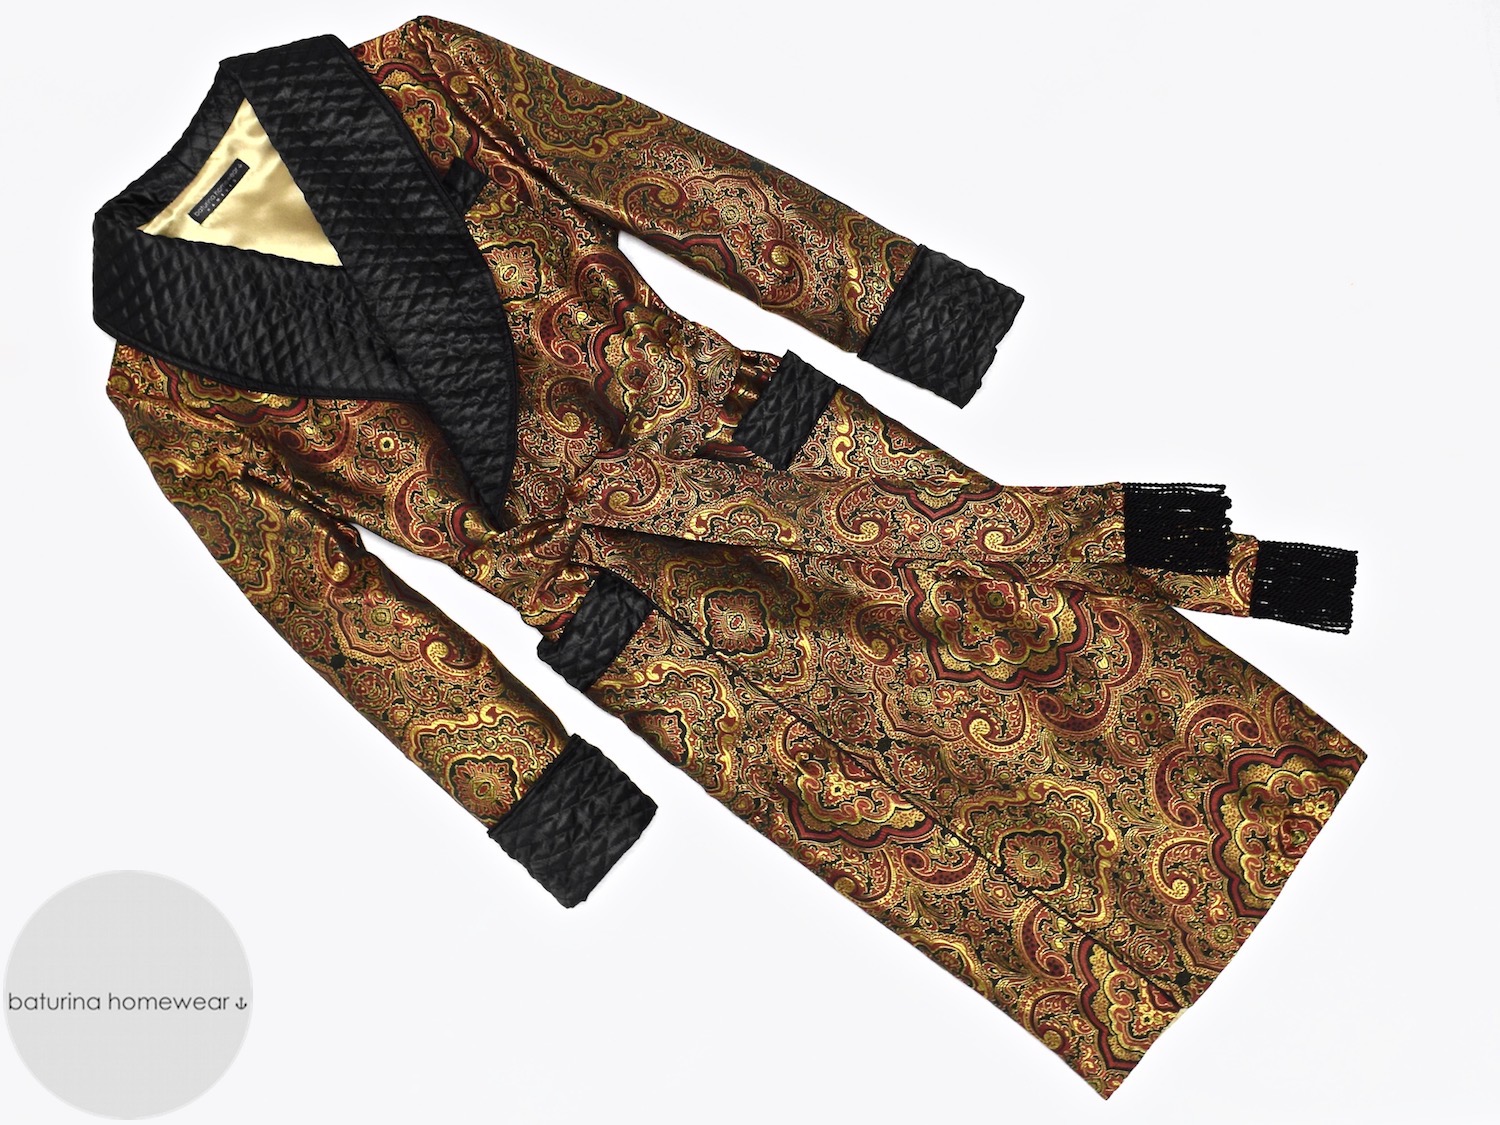 Men's Paisley Dressing Gown Luxury Robe Gold Blue Quilted